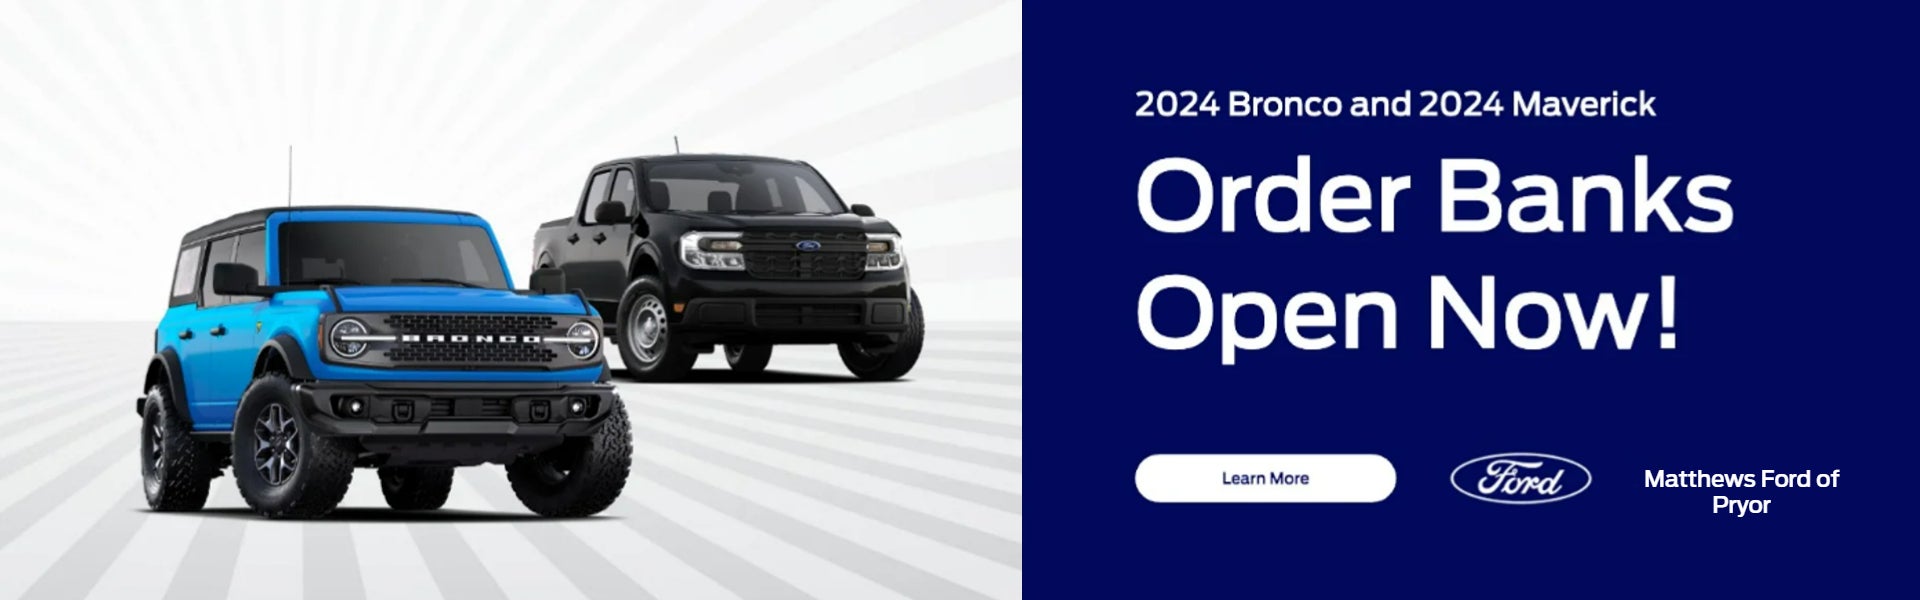 2024 Bronco and 2024 maverick order banks now open click her